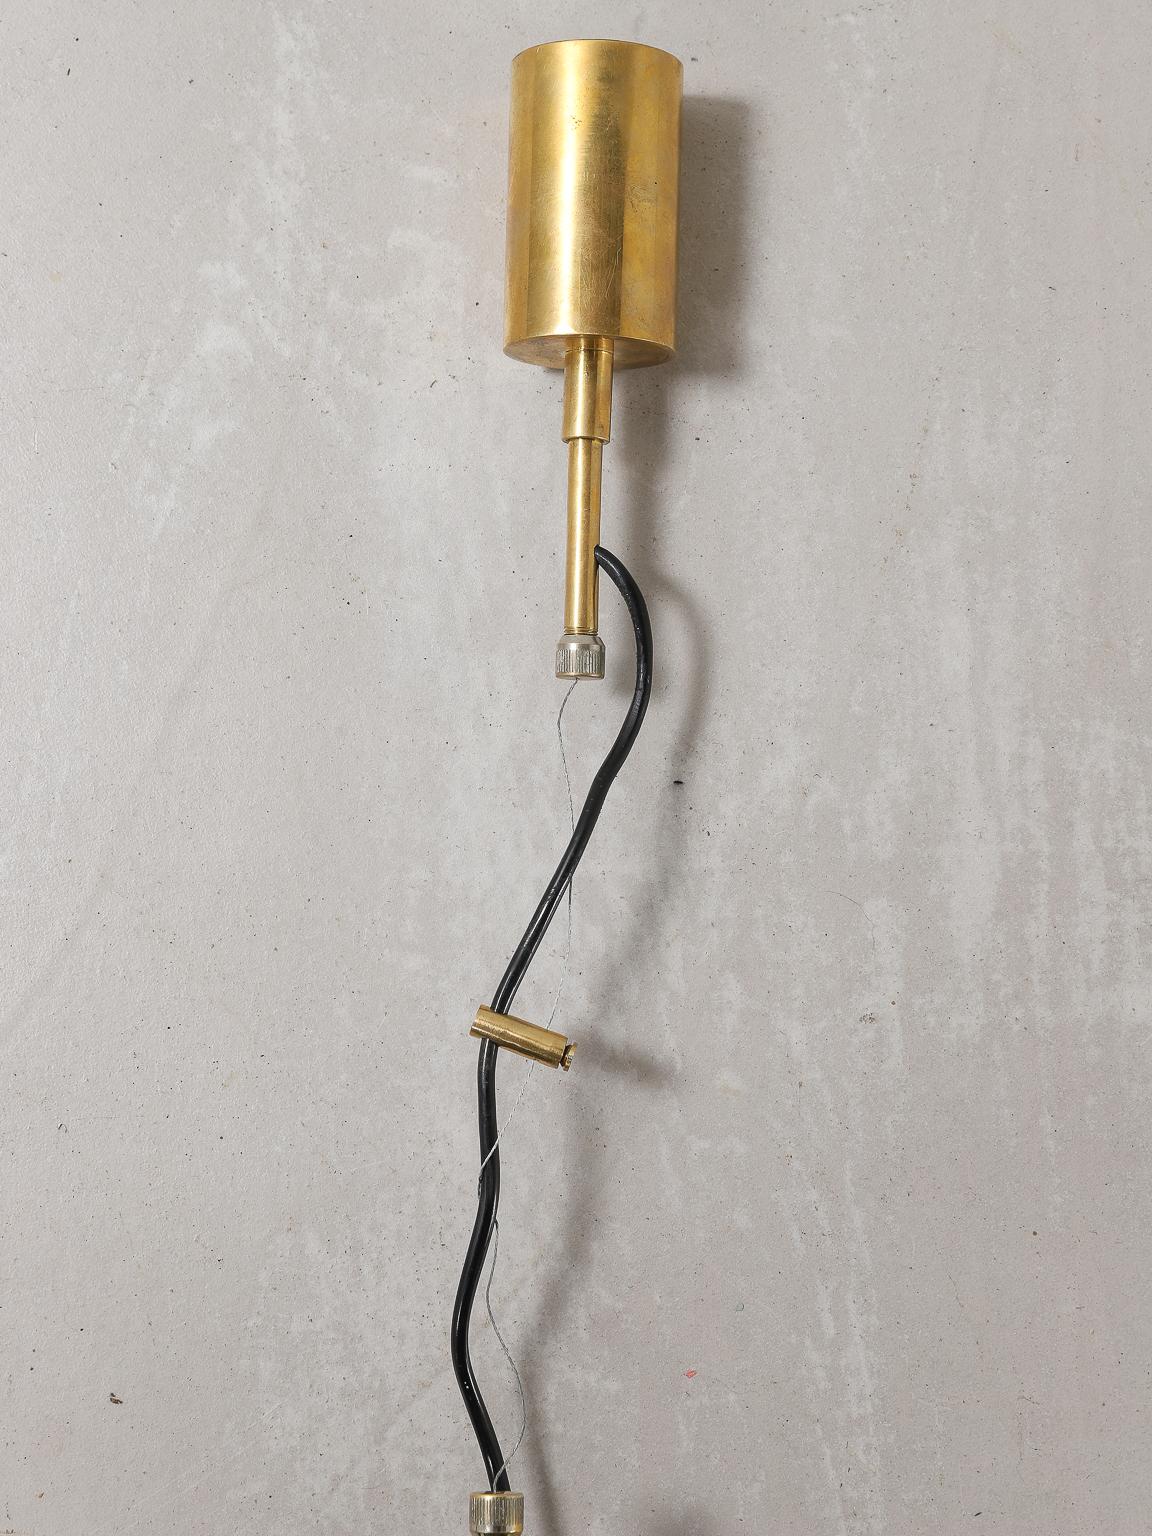 Stilnovo 1950s Italian Suspension Pendant Lacquered Metal Curved Glass and Brass (Messing)